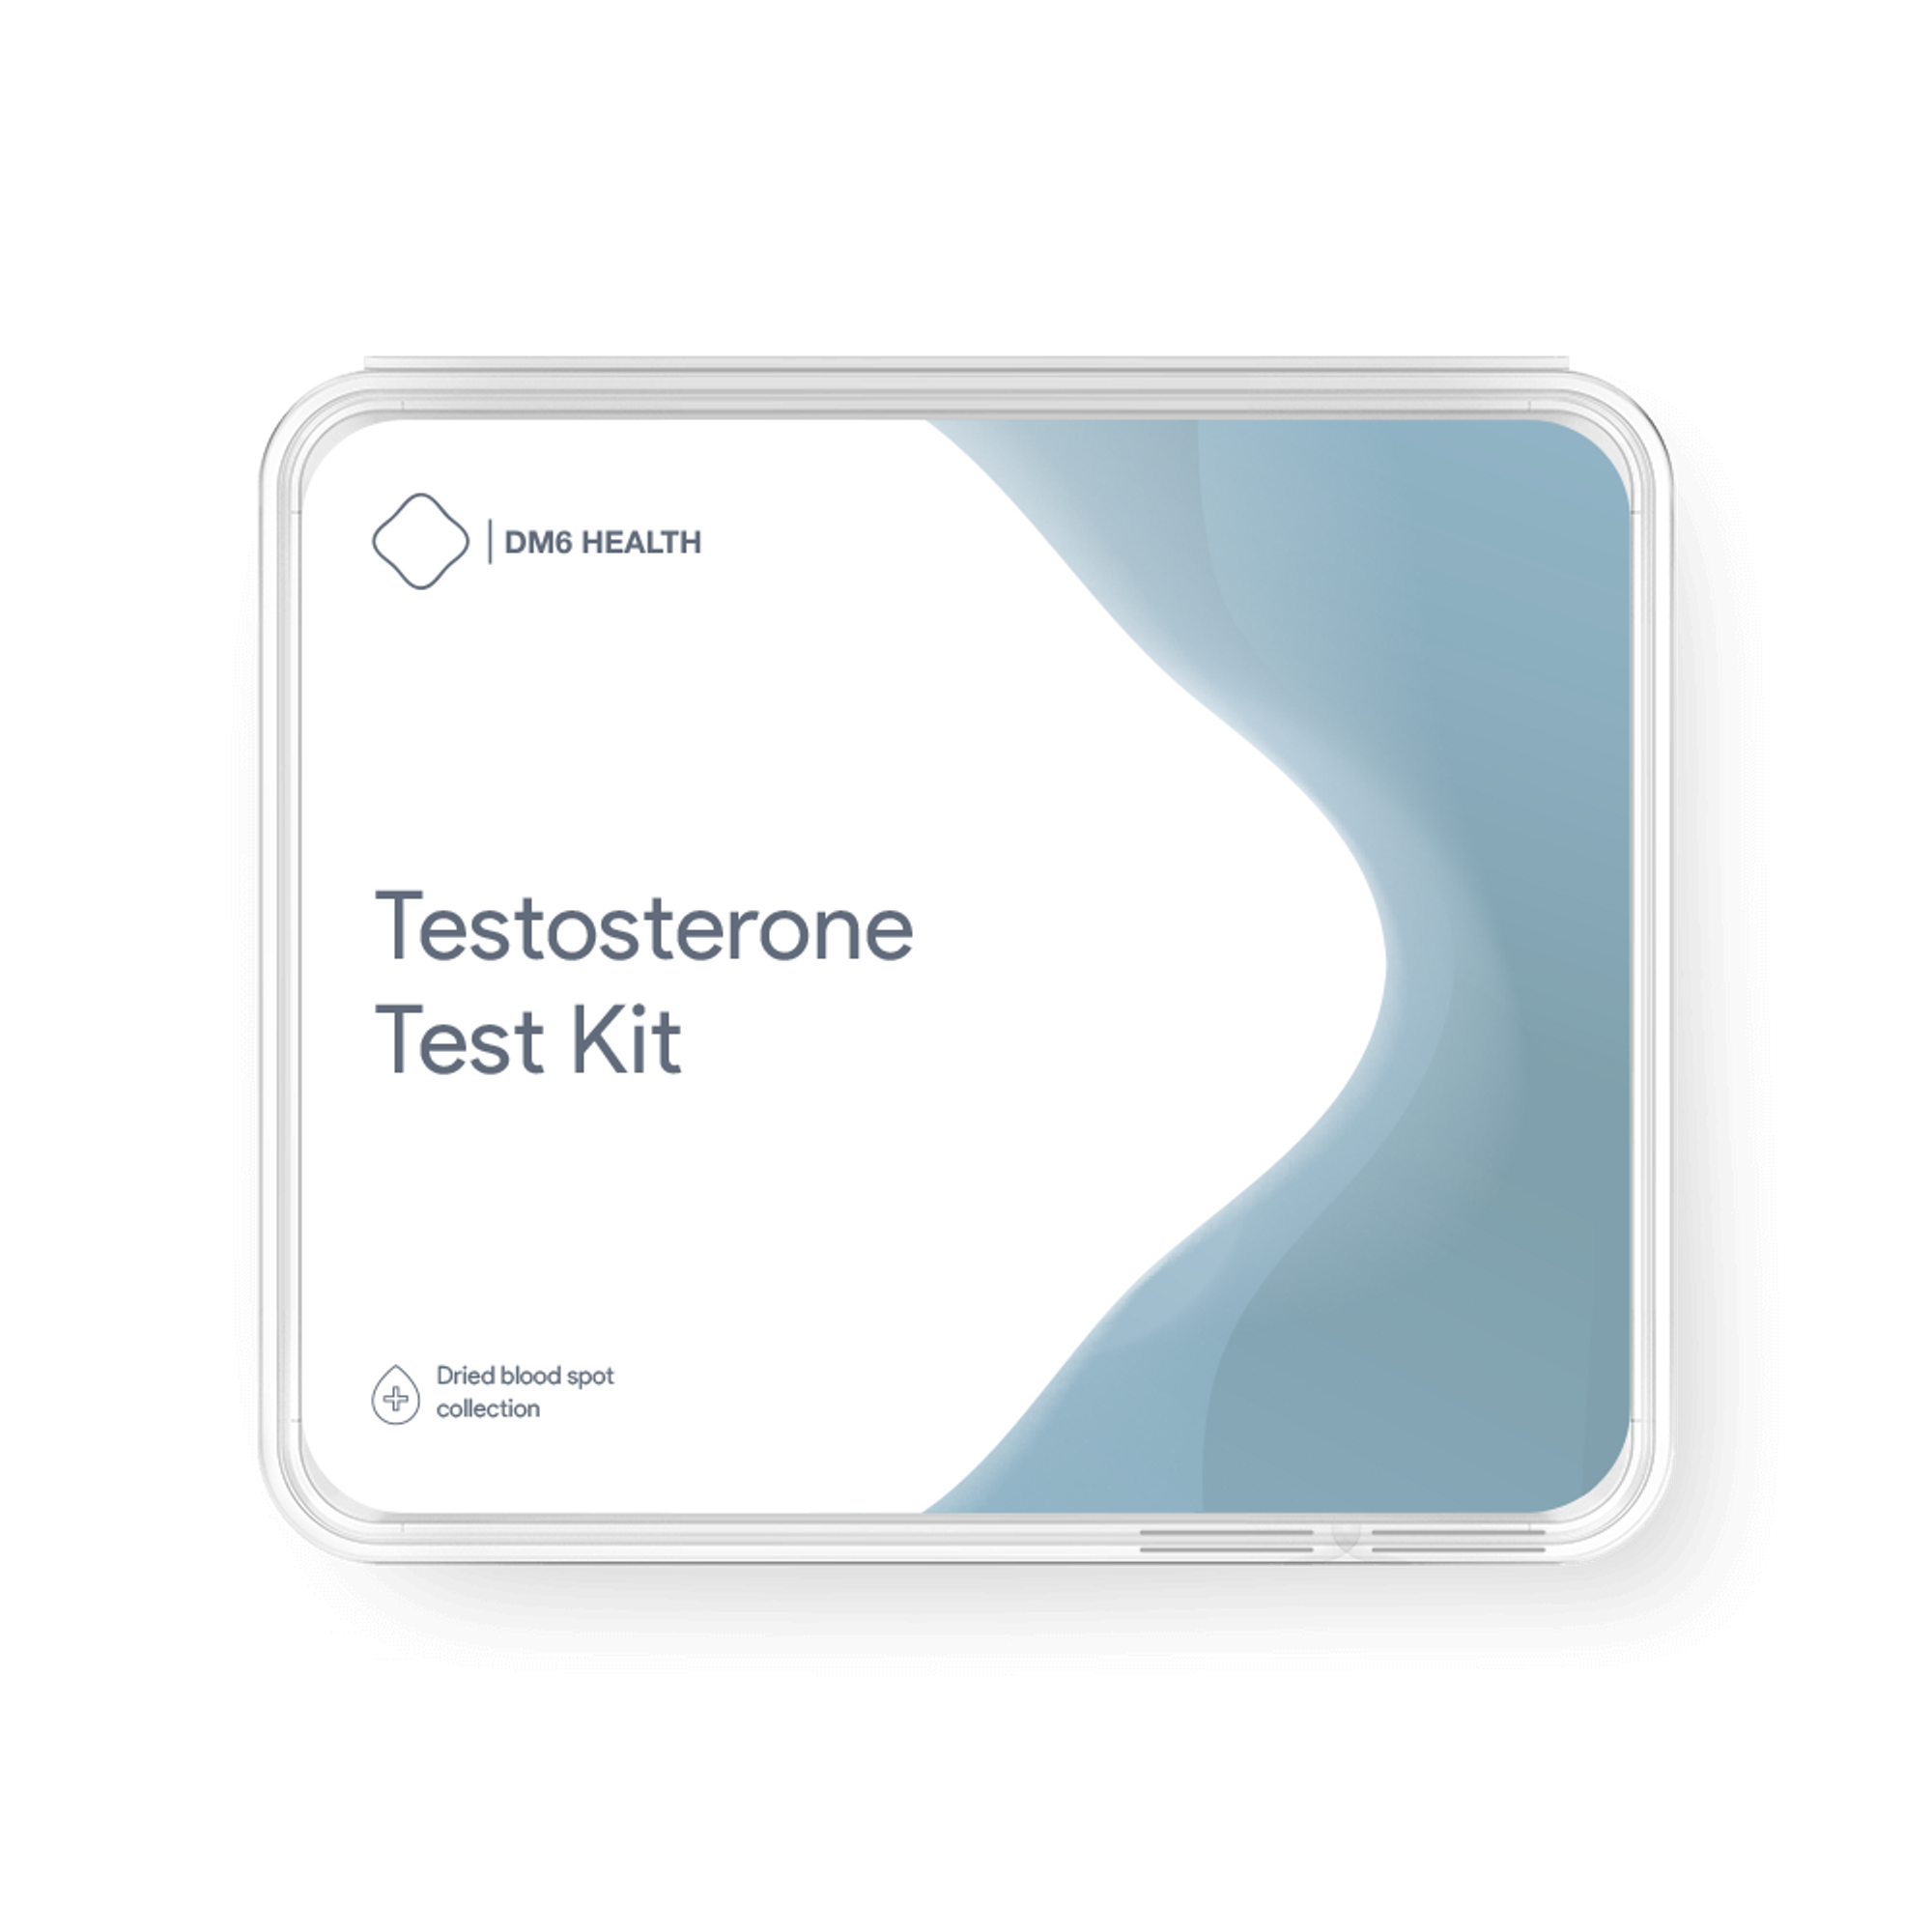 At-Home Test Kit For Men's Health Biomarkers I The Vitality Test™